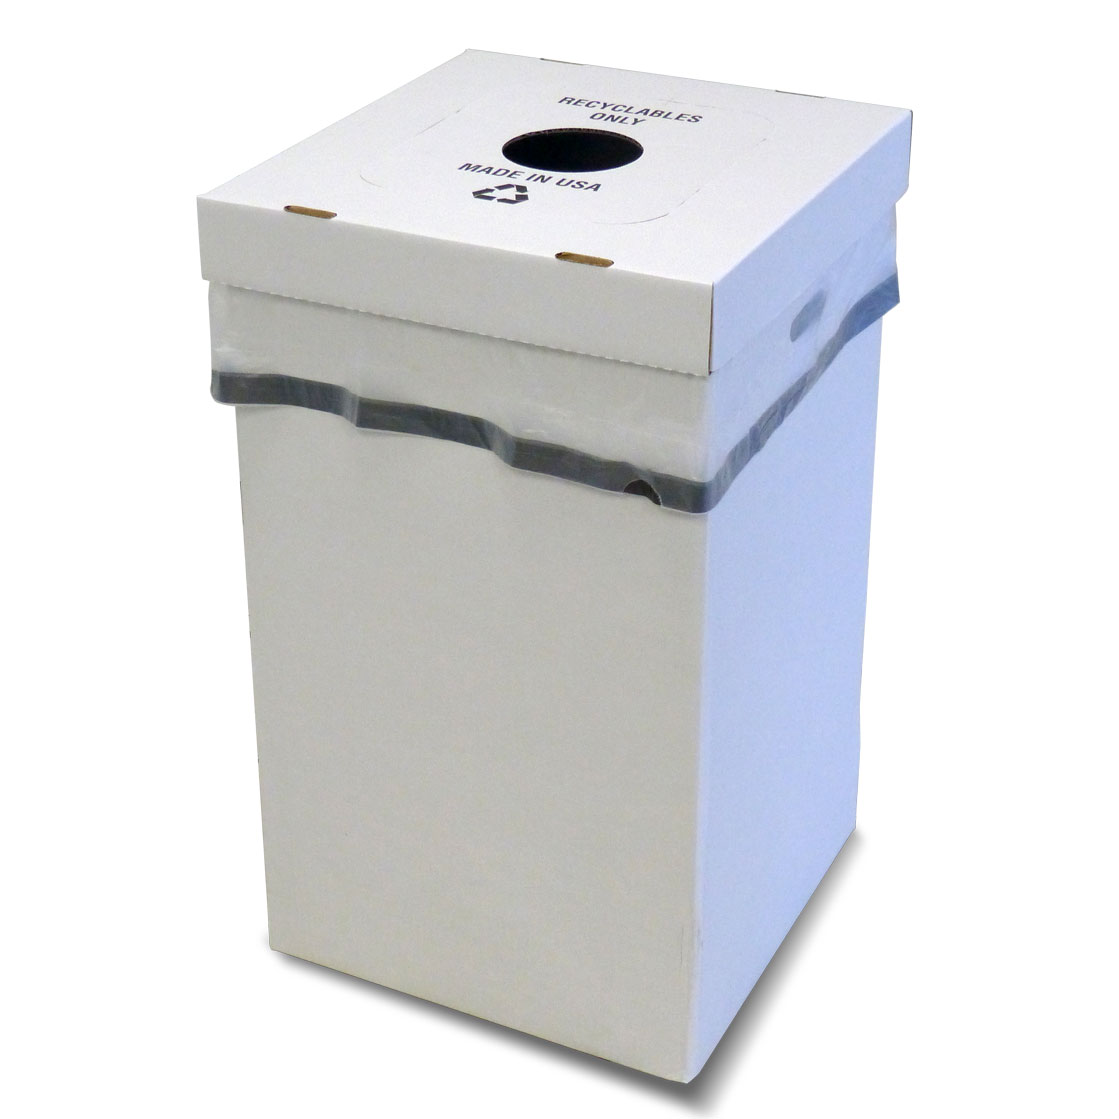 Disposable Recyclable Cardboard Trash Cans 